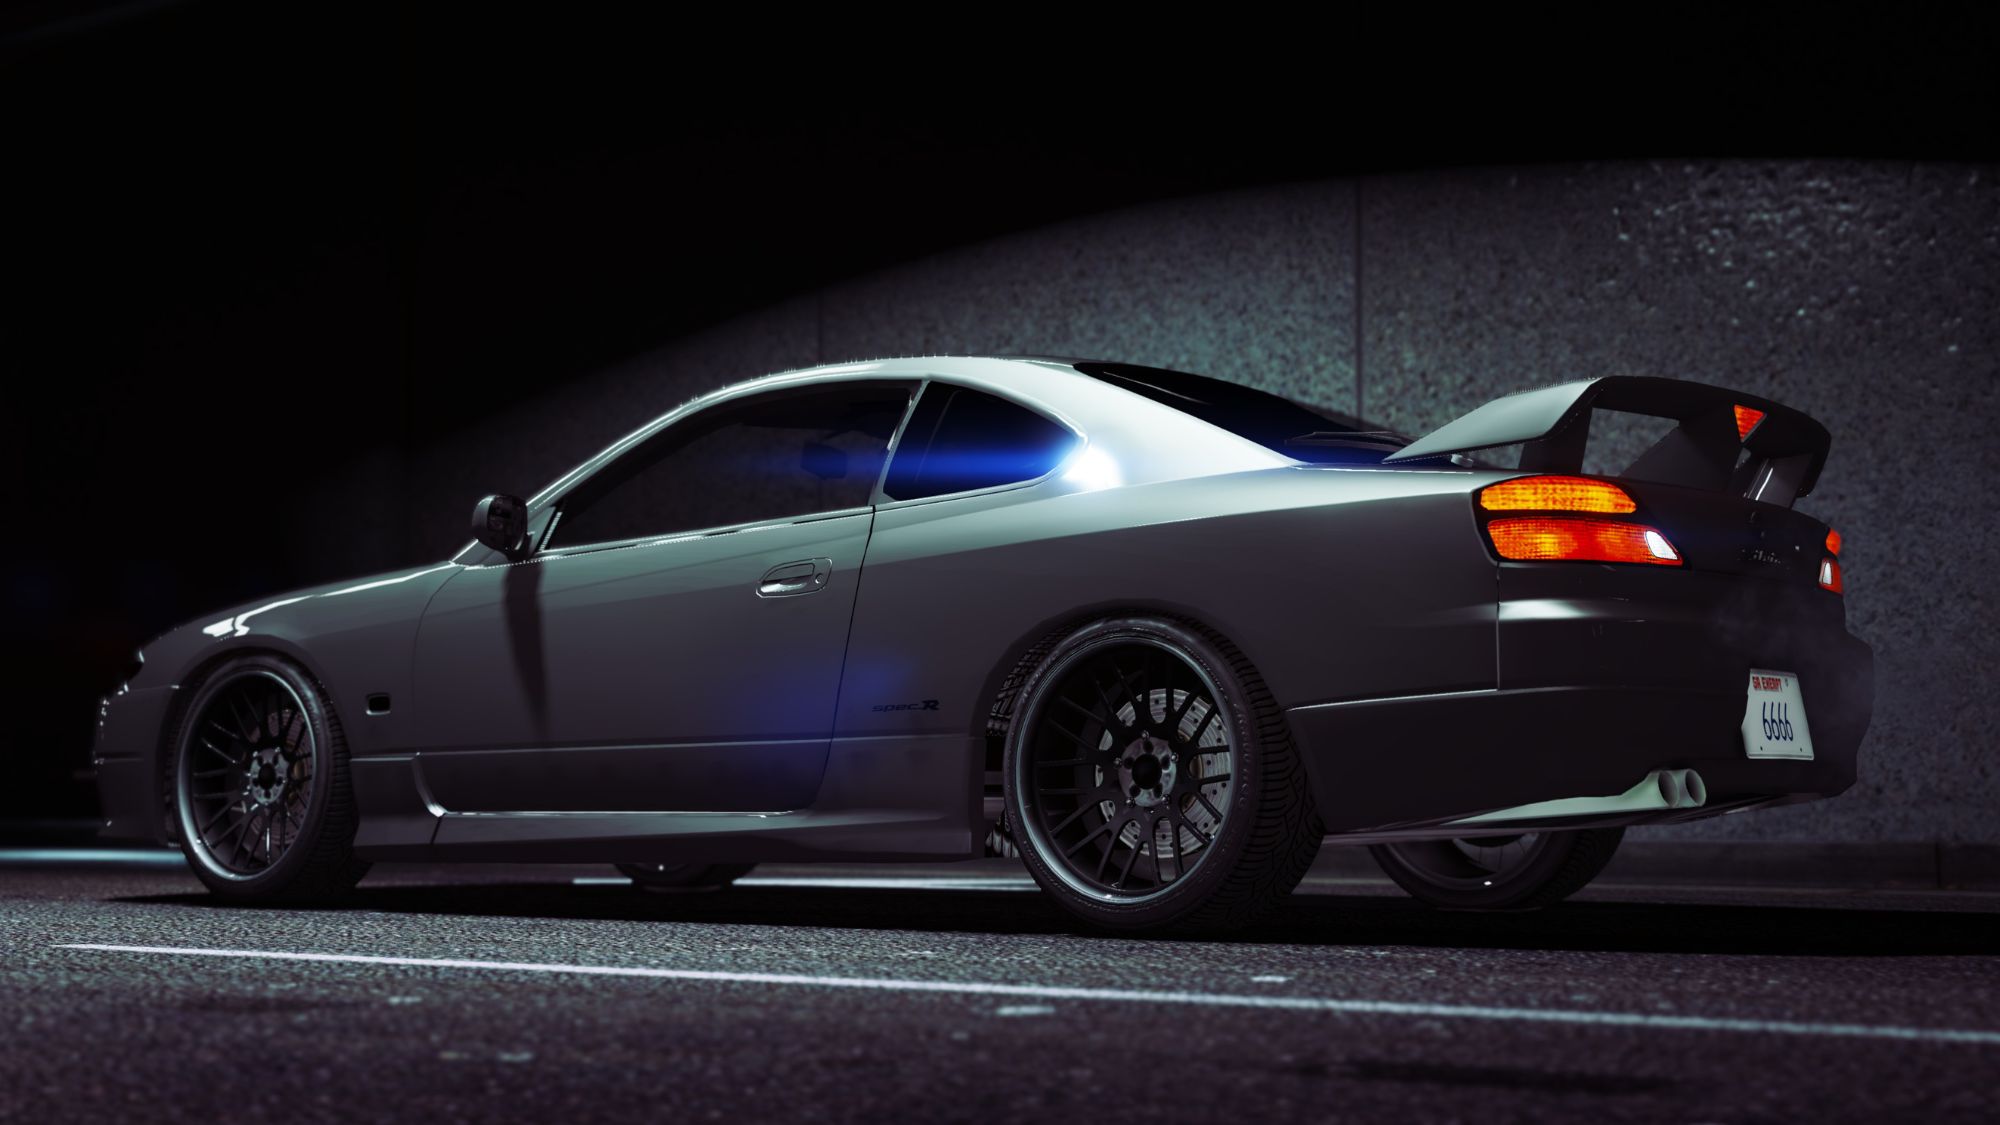 A modified car is showcased in the dark of the night, highlighting the best car mods